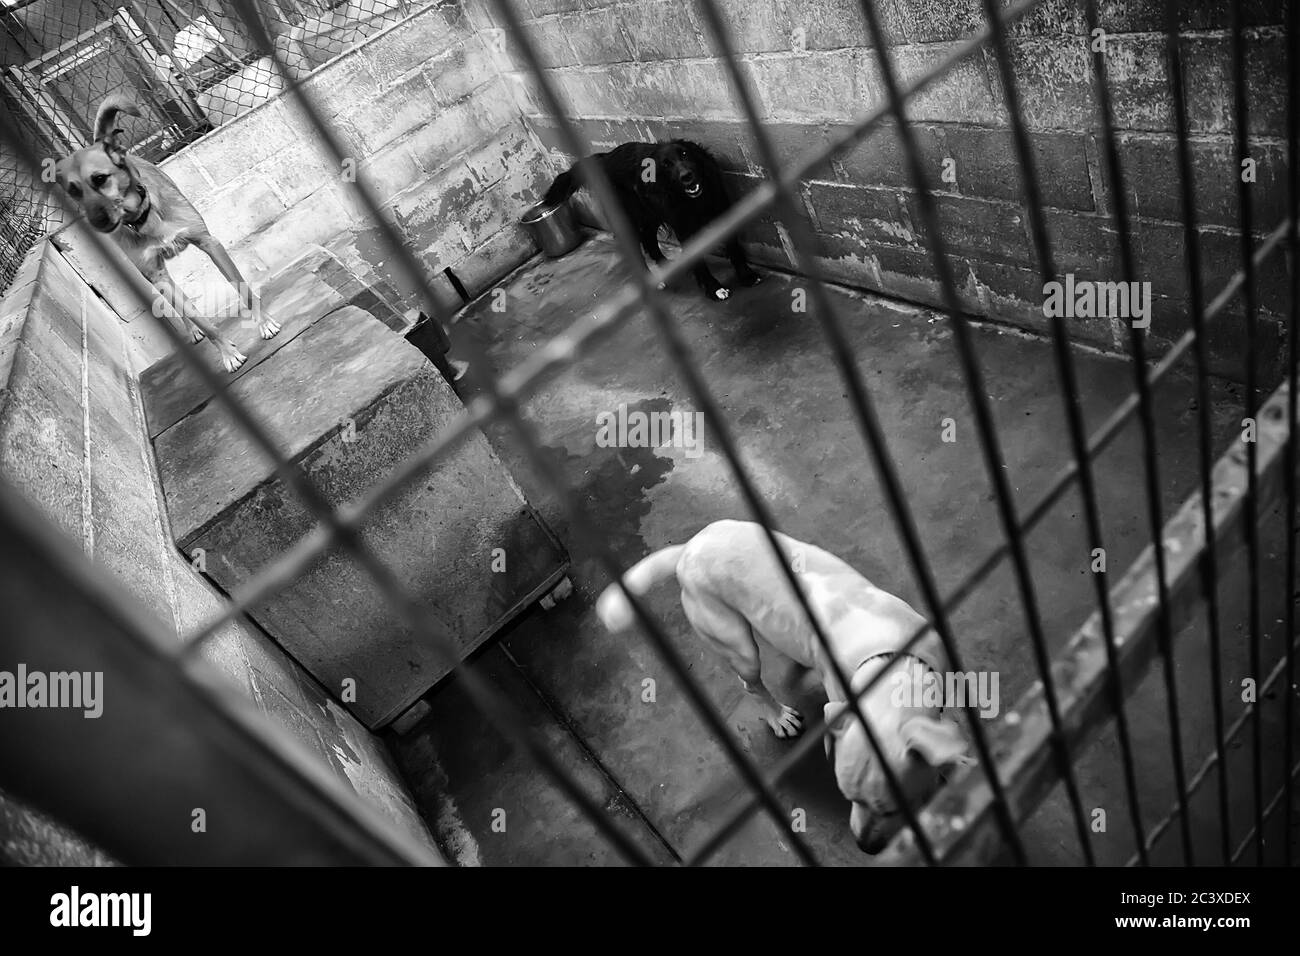 Dog in enclosed kennel, abandoned animals, abuse Stock Photo - Alamy